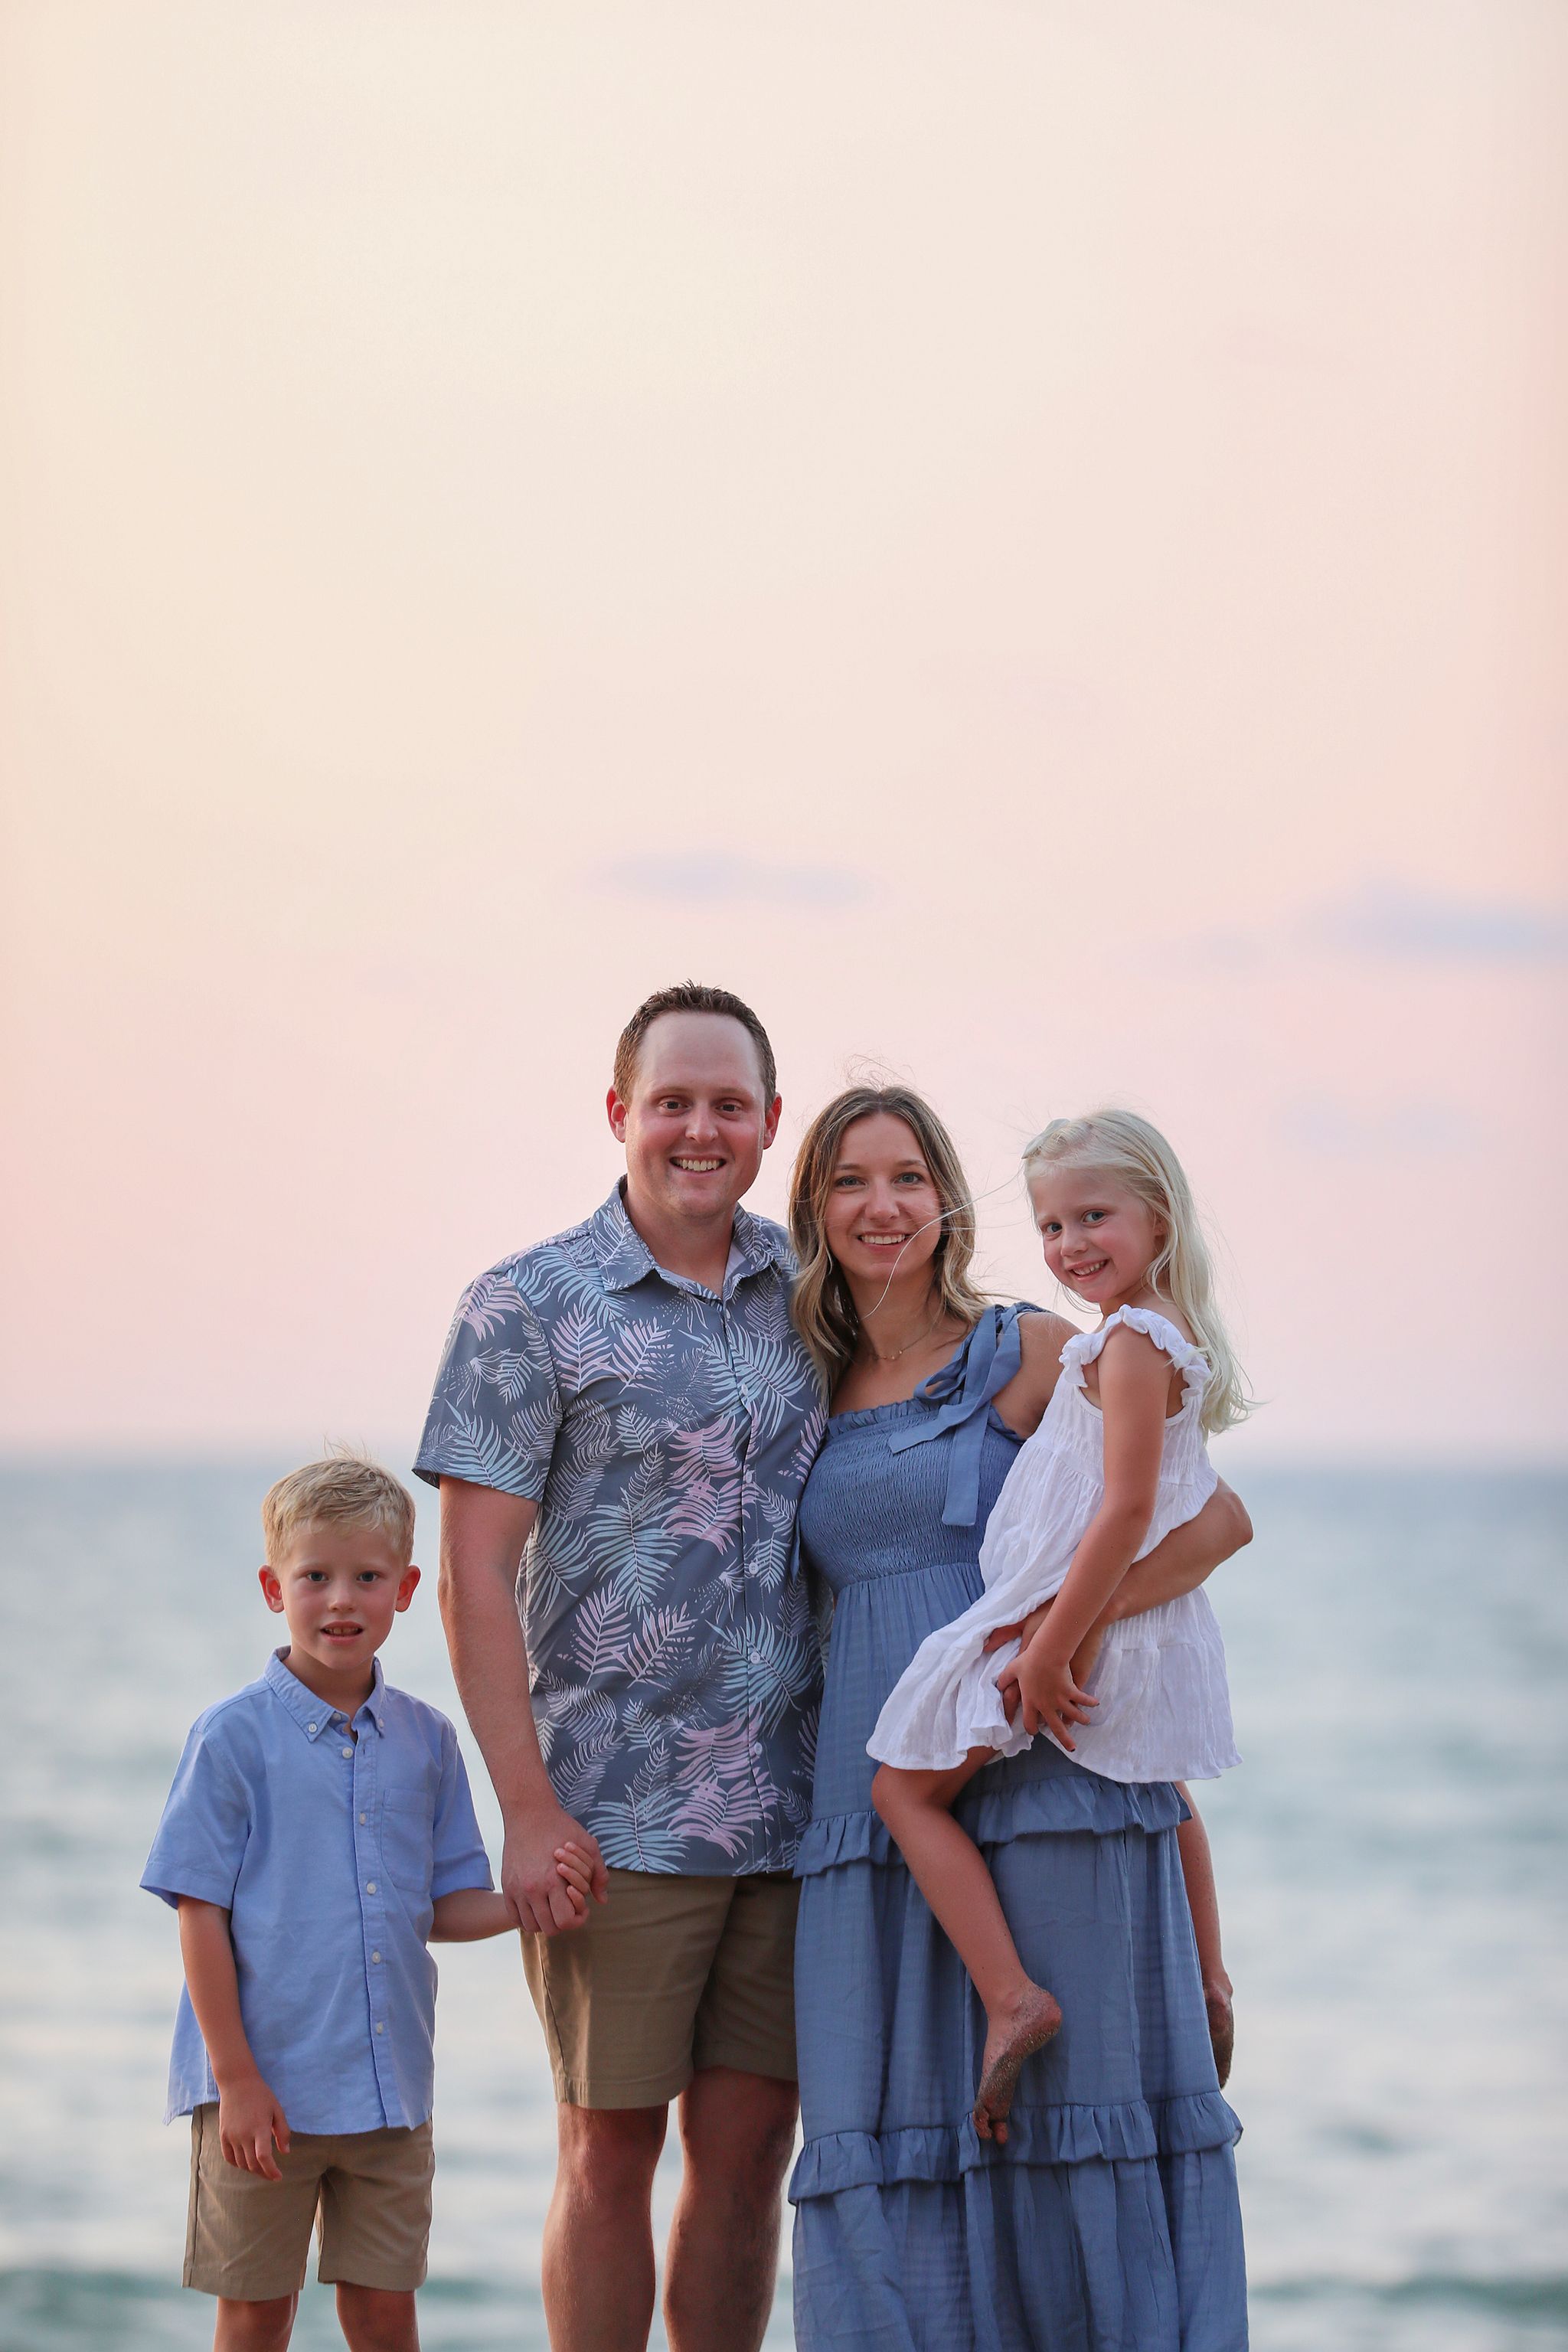 Family Beach Day Photo Session - 40 Minute Session